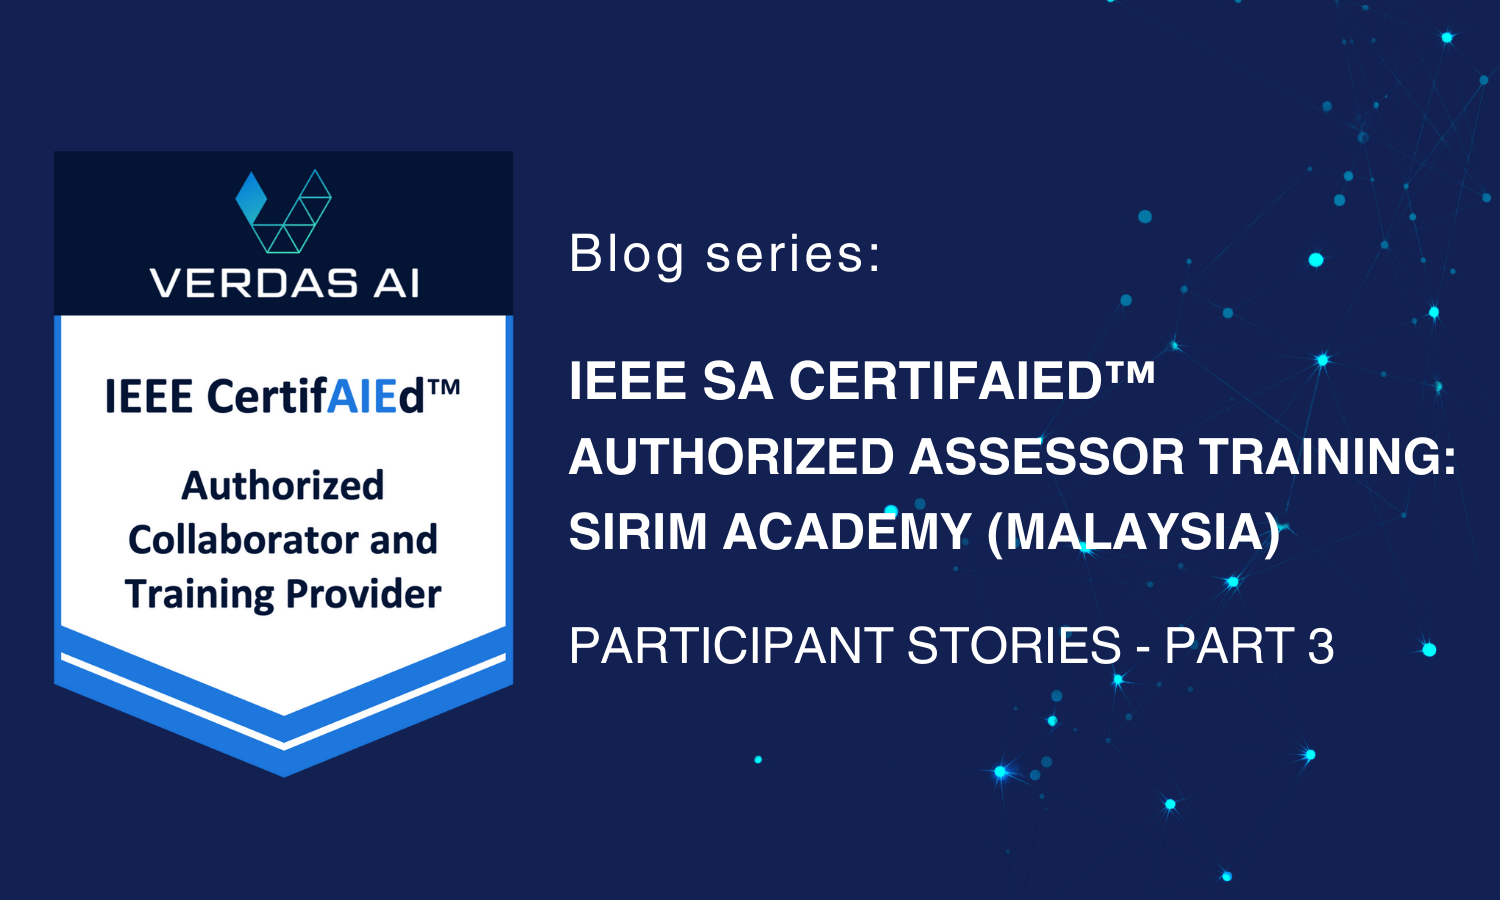 IEEE SA CertifAIEd™ Authorized Assessor Training: SIRIM Academy (Malaysia) - Participant Stories - Part 3